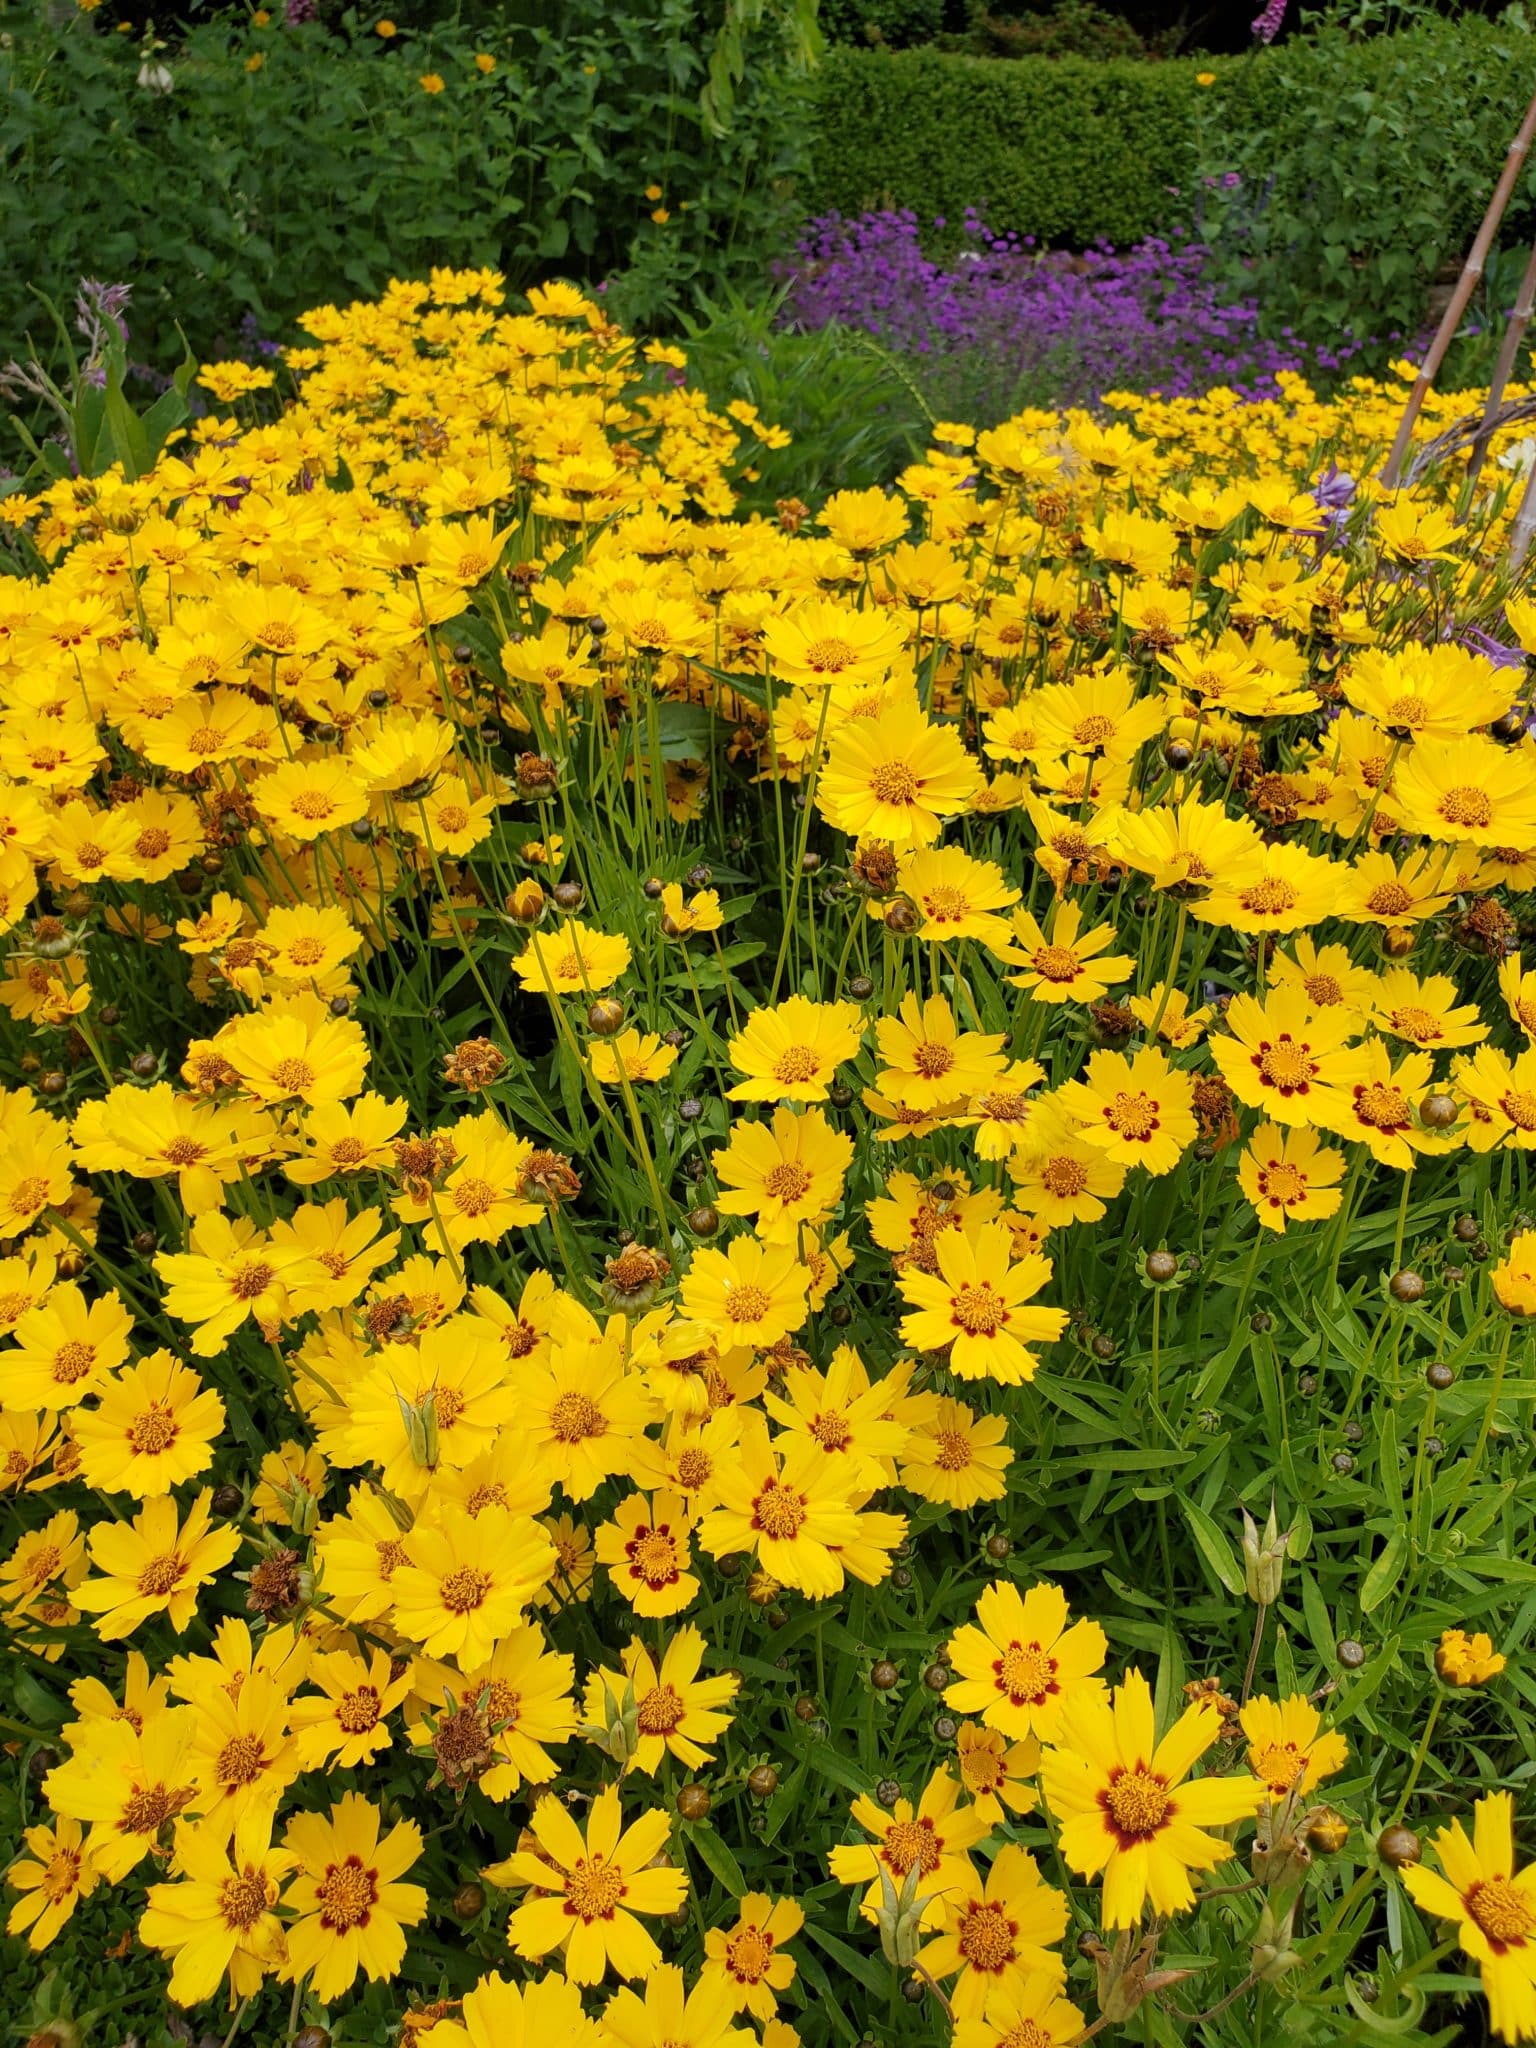 Dense cluster of yellow flowers with green leaves and stems.